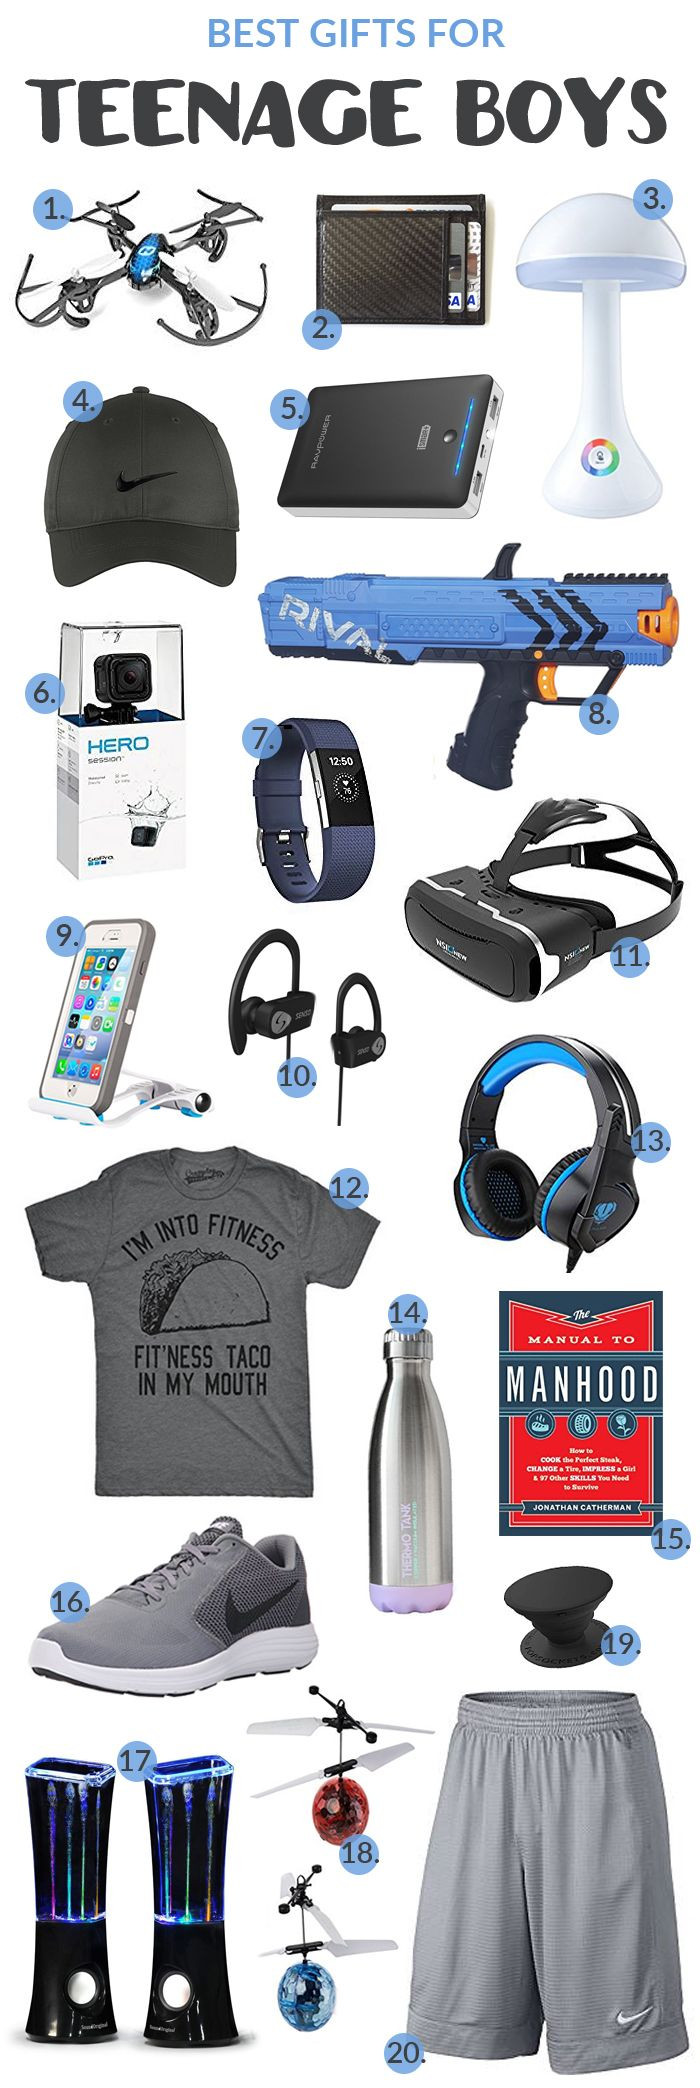 Christmas Gift Ideas For Teen Boyfriends
 Best Gifts for Teenage Boys